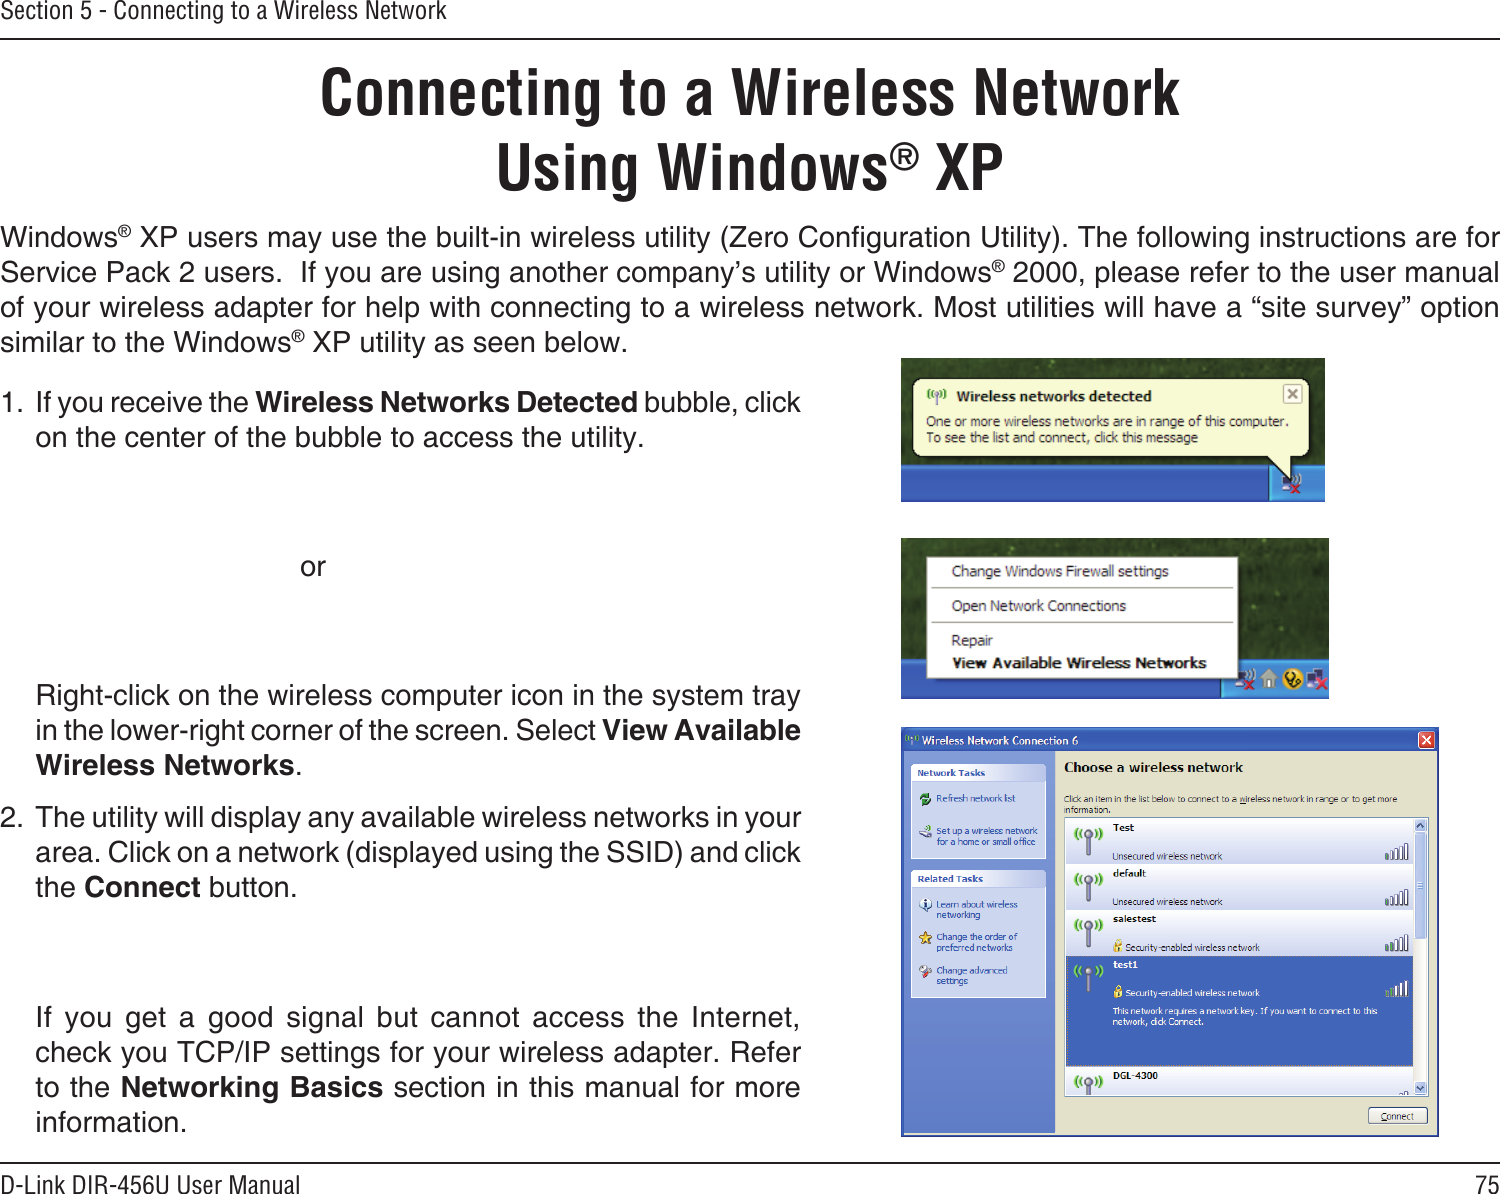 75D-Link DIR-456U User ManualSection 5 - Connecting to a Wireless NetworkConnecting to a Wireless NetworkUsing Windows® XPWindows® XP users may use the built-in wireless utility (Zero Conguration Utility). The following instructions are for Service Pack 2 users.  If you are using another company’s utility or Windows® 2000, please refer to the user manual of your wireless adapter for help with connecting to a wireless network. Most utilities will have a “site survey” option similar to the Windows® XP utility as seen below.1. If you receive the Wireless Networks Detected bubble, click on the center of the bubble to access the utility.          or  Right-click on the wireless computer icon in the system tray in the lower-right corner of the screen. Select View Available Wireless Networks.2. The utility will display any available wireless networks in your area. Click on a network (displayed using the SSID) and click the Connect button.  If  you  get  a  good  signal  but  cannot  access  the  Internet, check you TCP/IP settings for your wireless adapter. Refer to the Networking Basics section in this manual for more information.